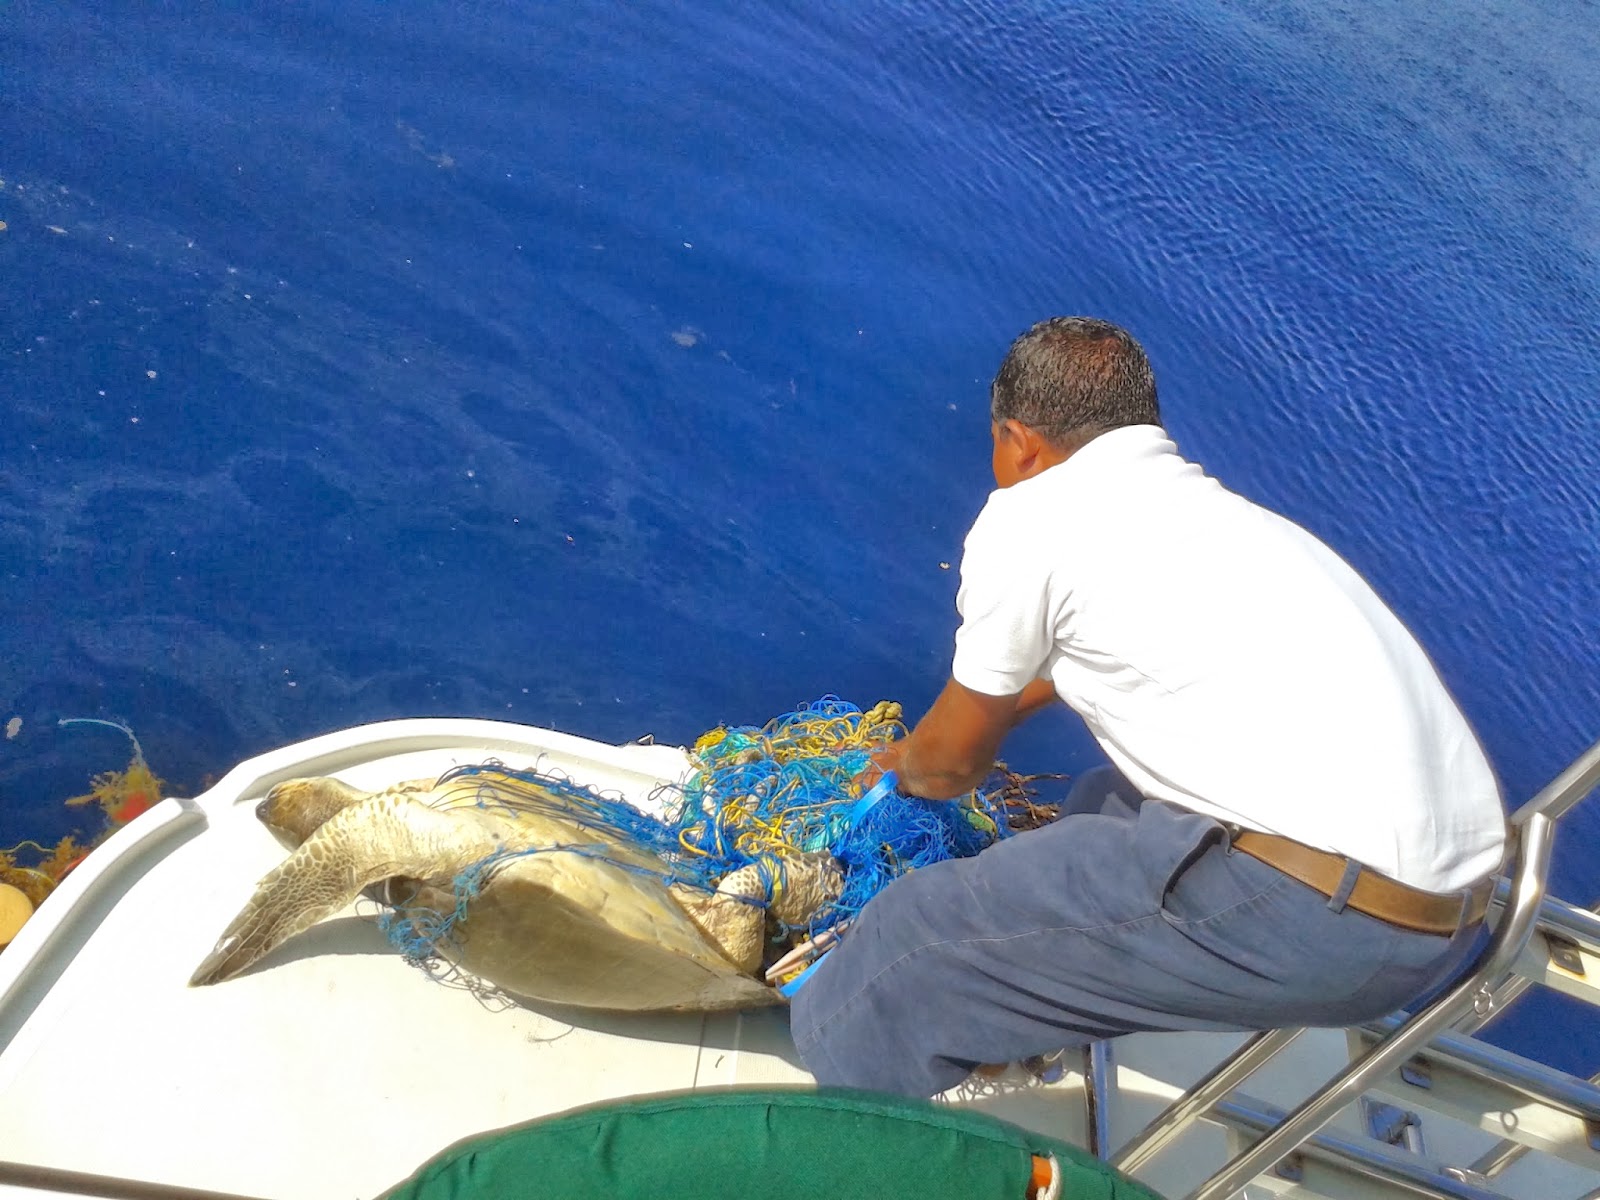 Gili boat crew saves 1 Olive Ridley Turtle from a Death Trap